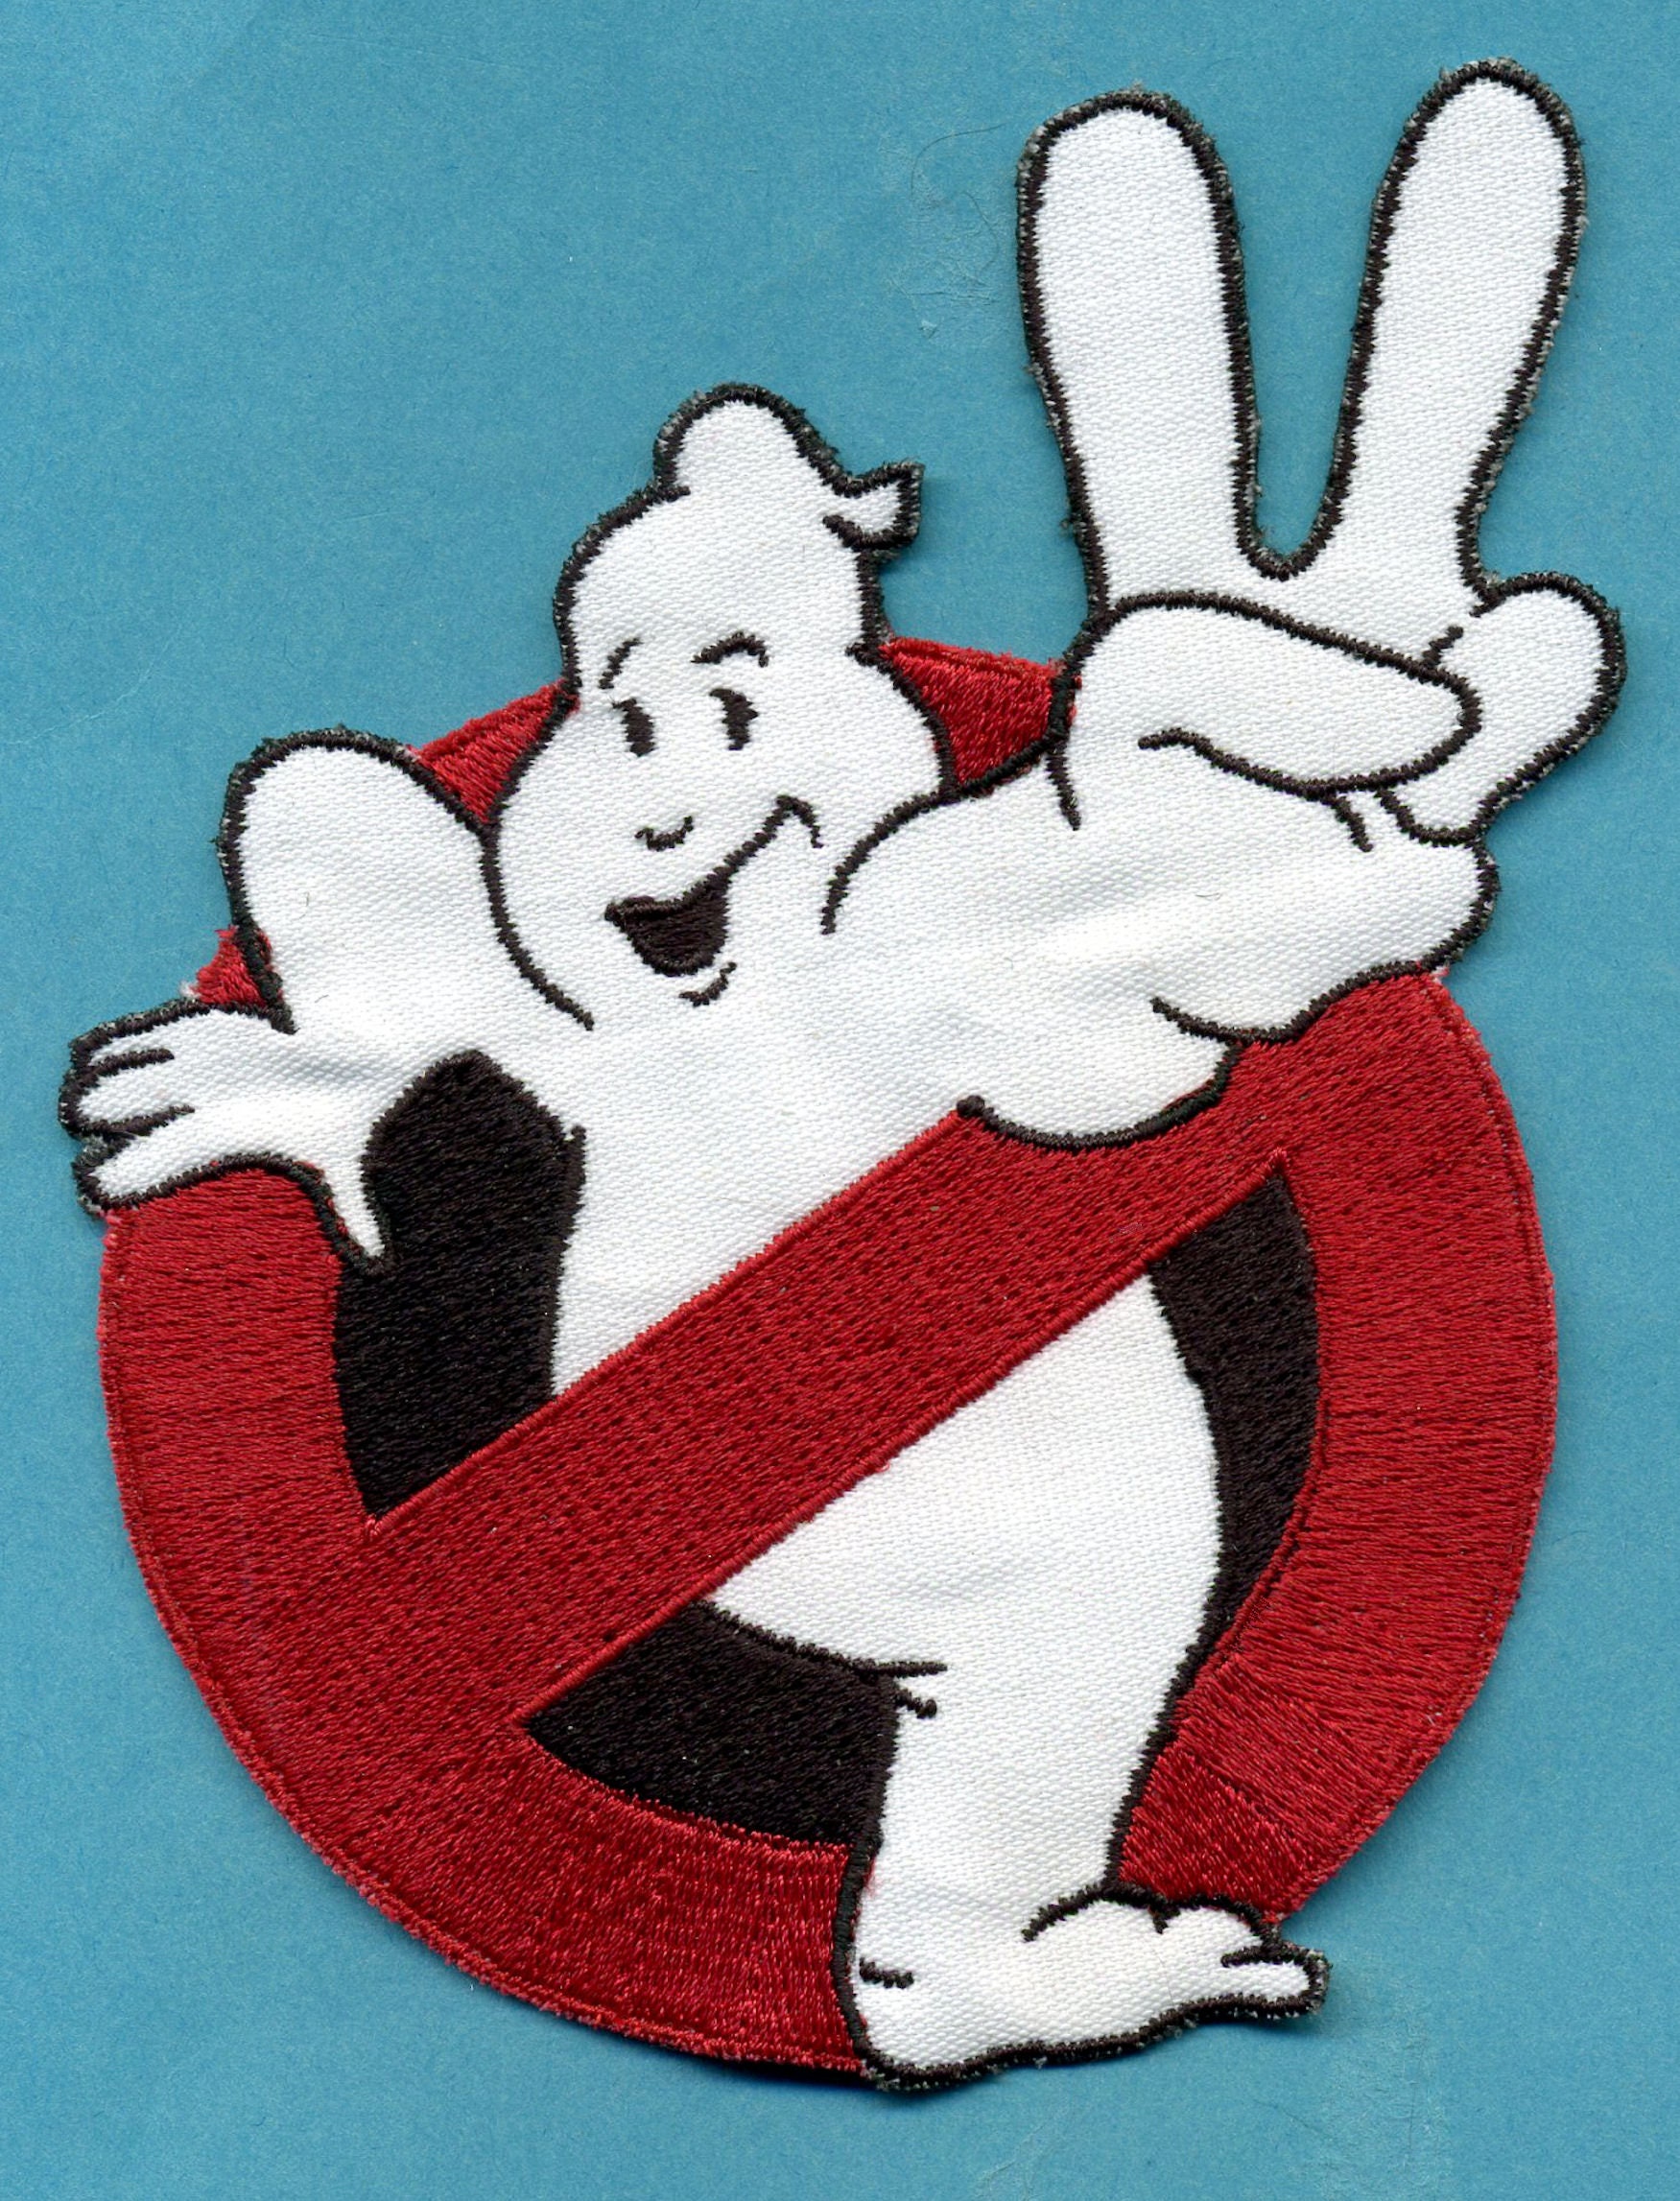 Green Lantern Ghostbusters No Ghost Embroidered Iron-On Patch 